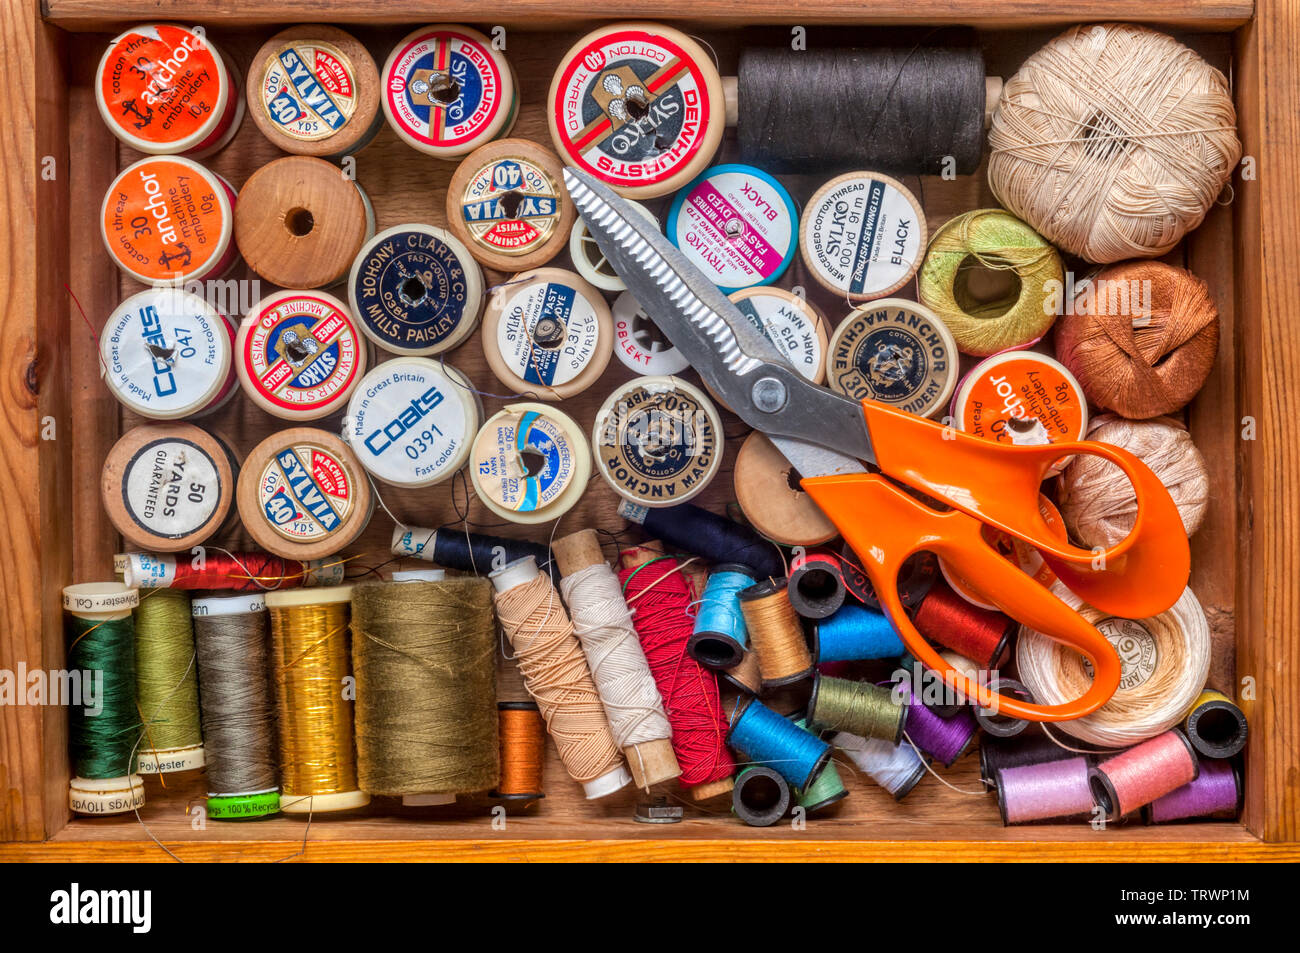 Haberdashery or sewing items stored in a drawer - reels of cotton and thread with a pair of scissors. Stock Photo